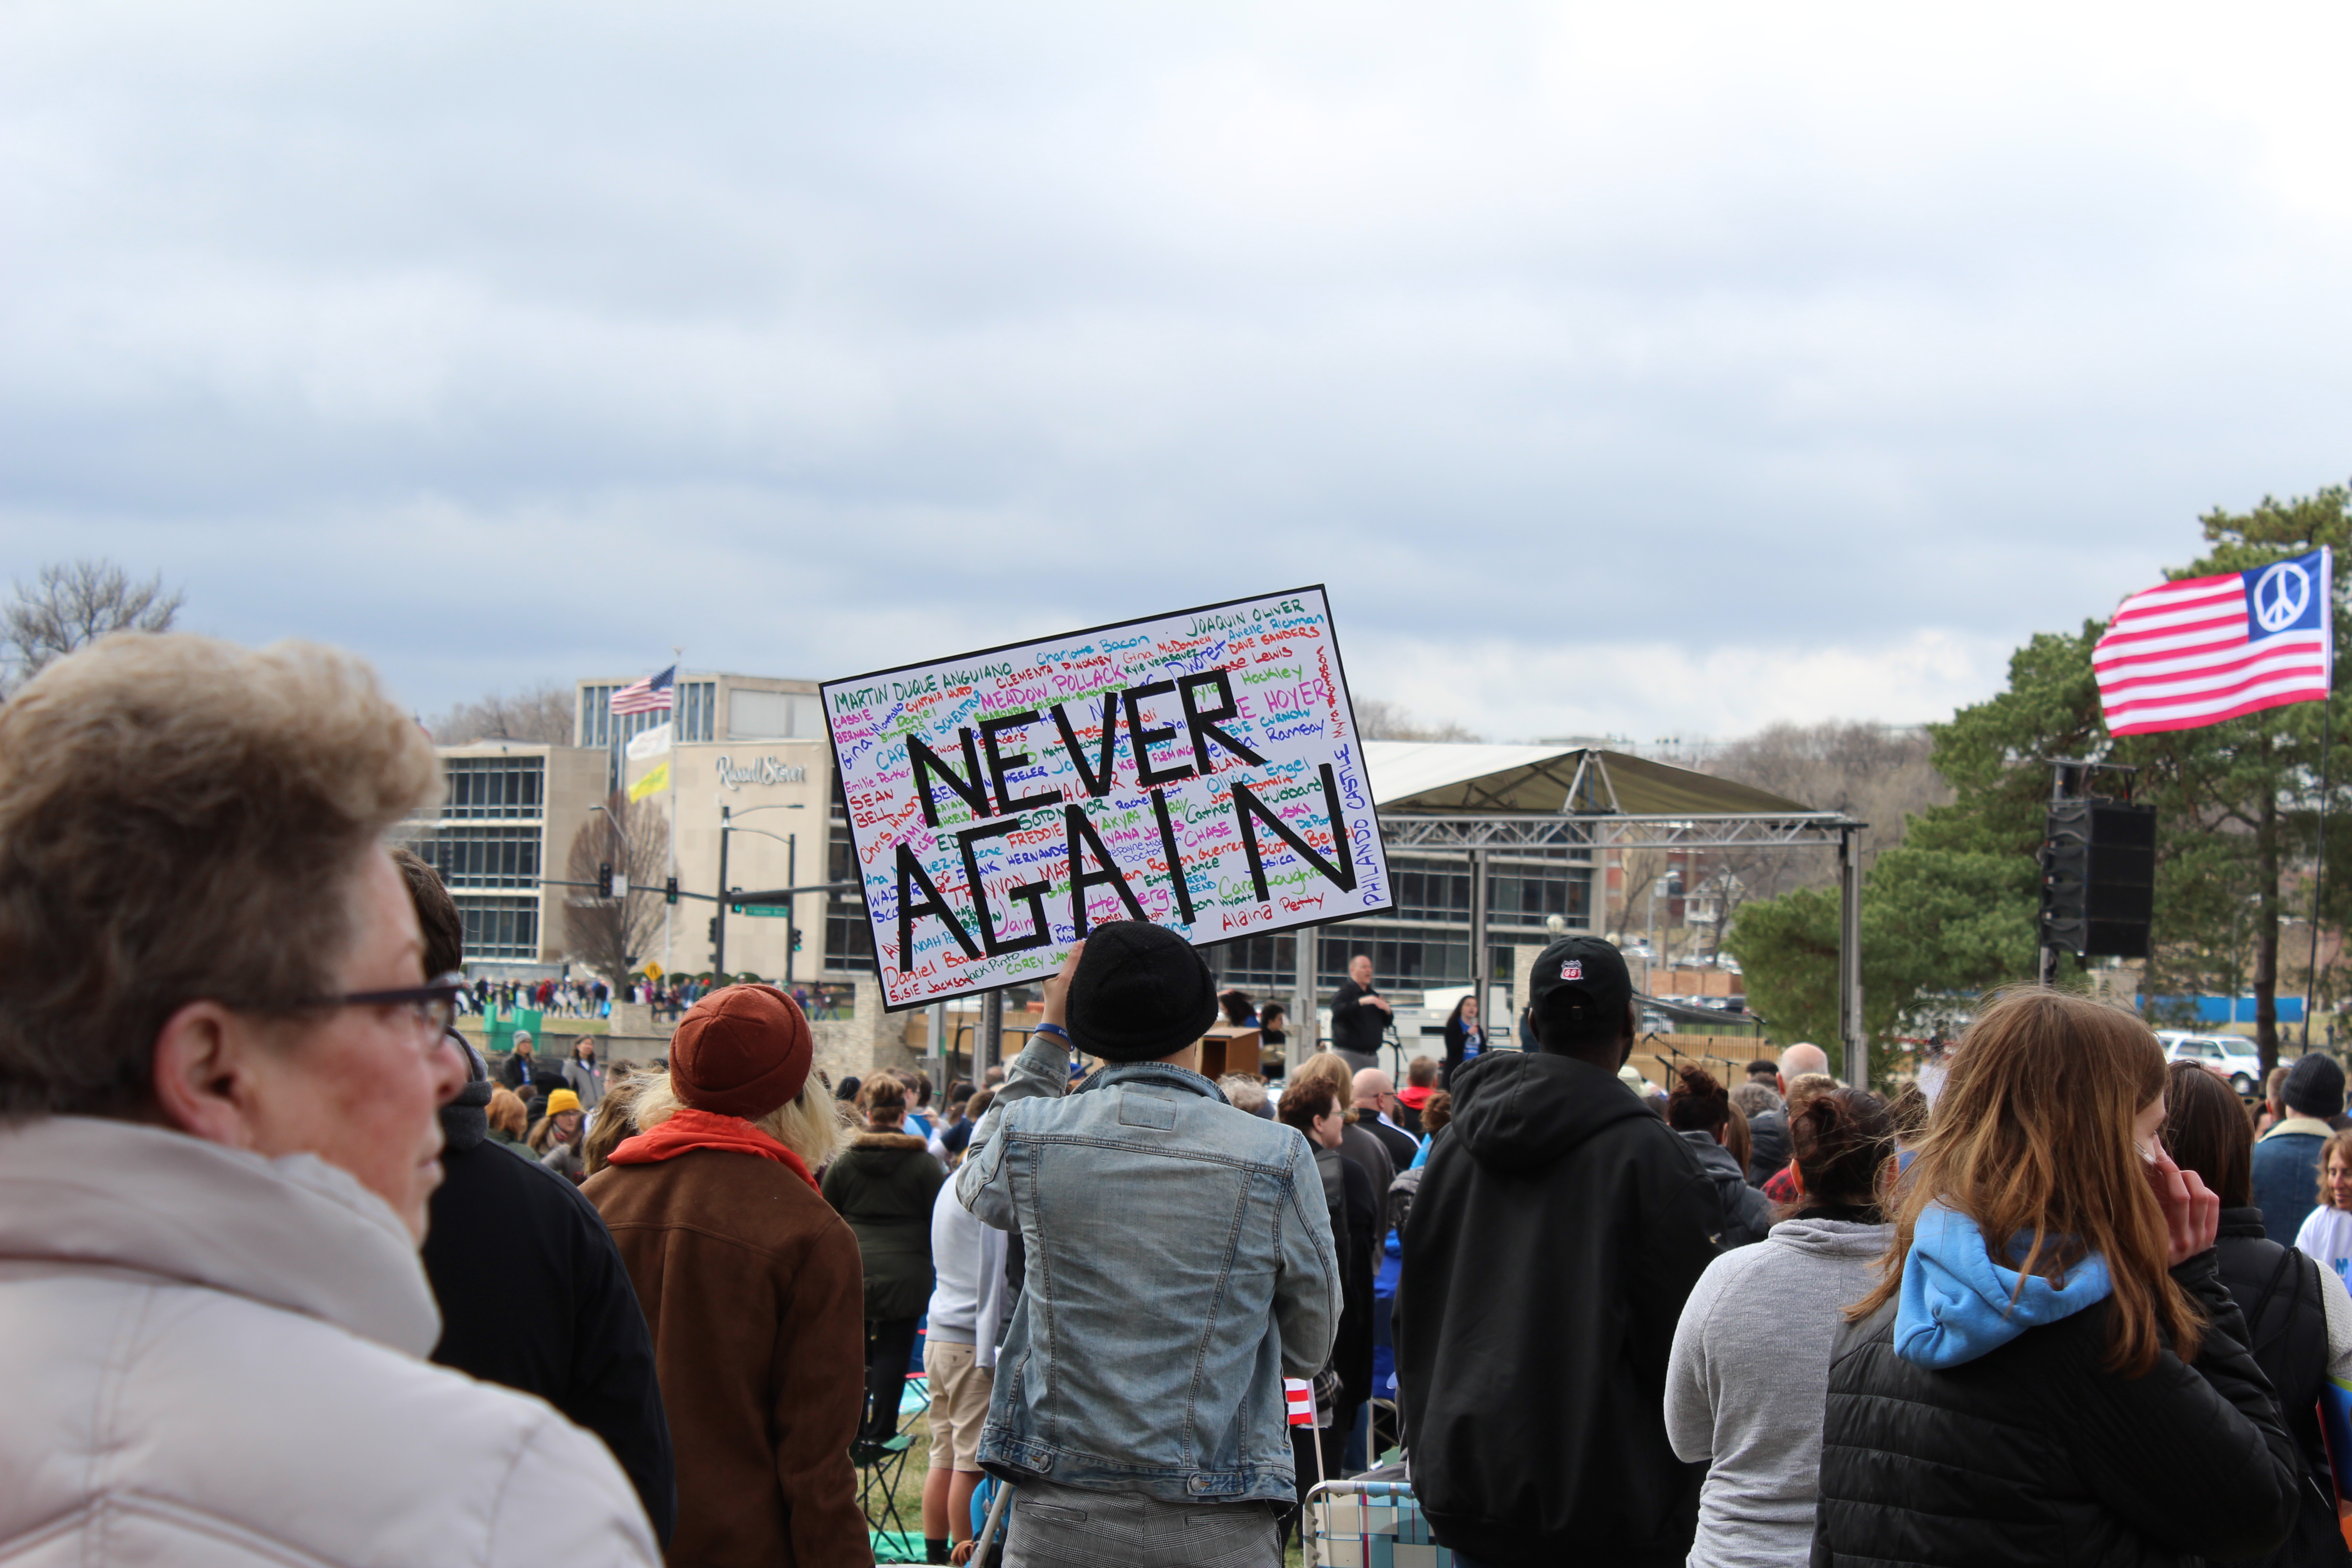 A protester holds up a large sign during speaker presentations that includes the names of victims in multiple colors, with the contrast of black letters to say “Never Again.” The protester held the sign up while the crowd chanted “never again, never again,” after a speaker held a roll call for all those who had died in the Parkland, Florida shootings. Photo: Carina Smith, 14 East.